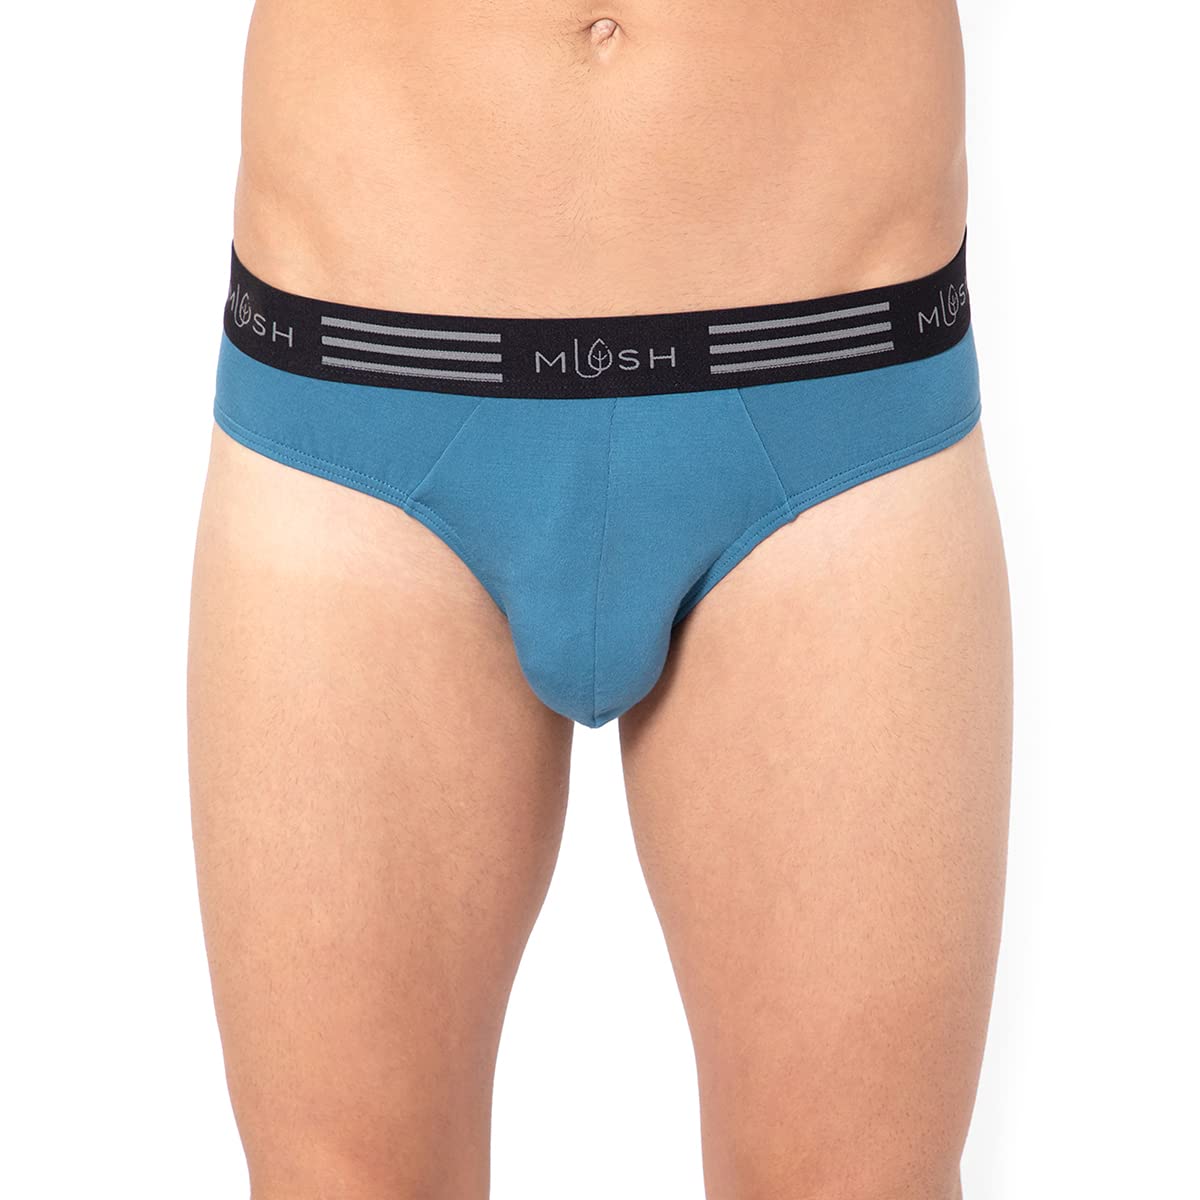 Mush Ultra Soft, Breathable, Feather Light Men's Bamboo Brief || Naturally Anti-Odor and Anti-Microbial Bamboo Innerwear (S, Blue)